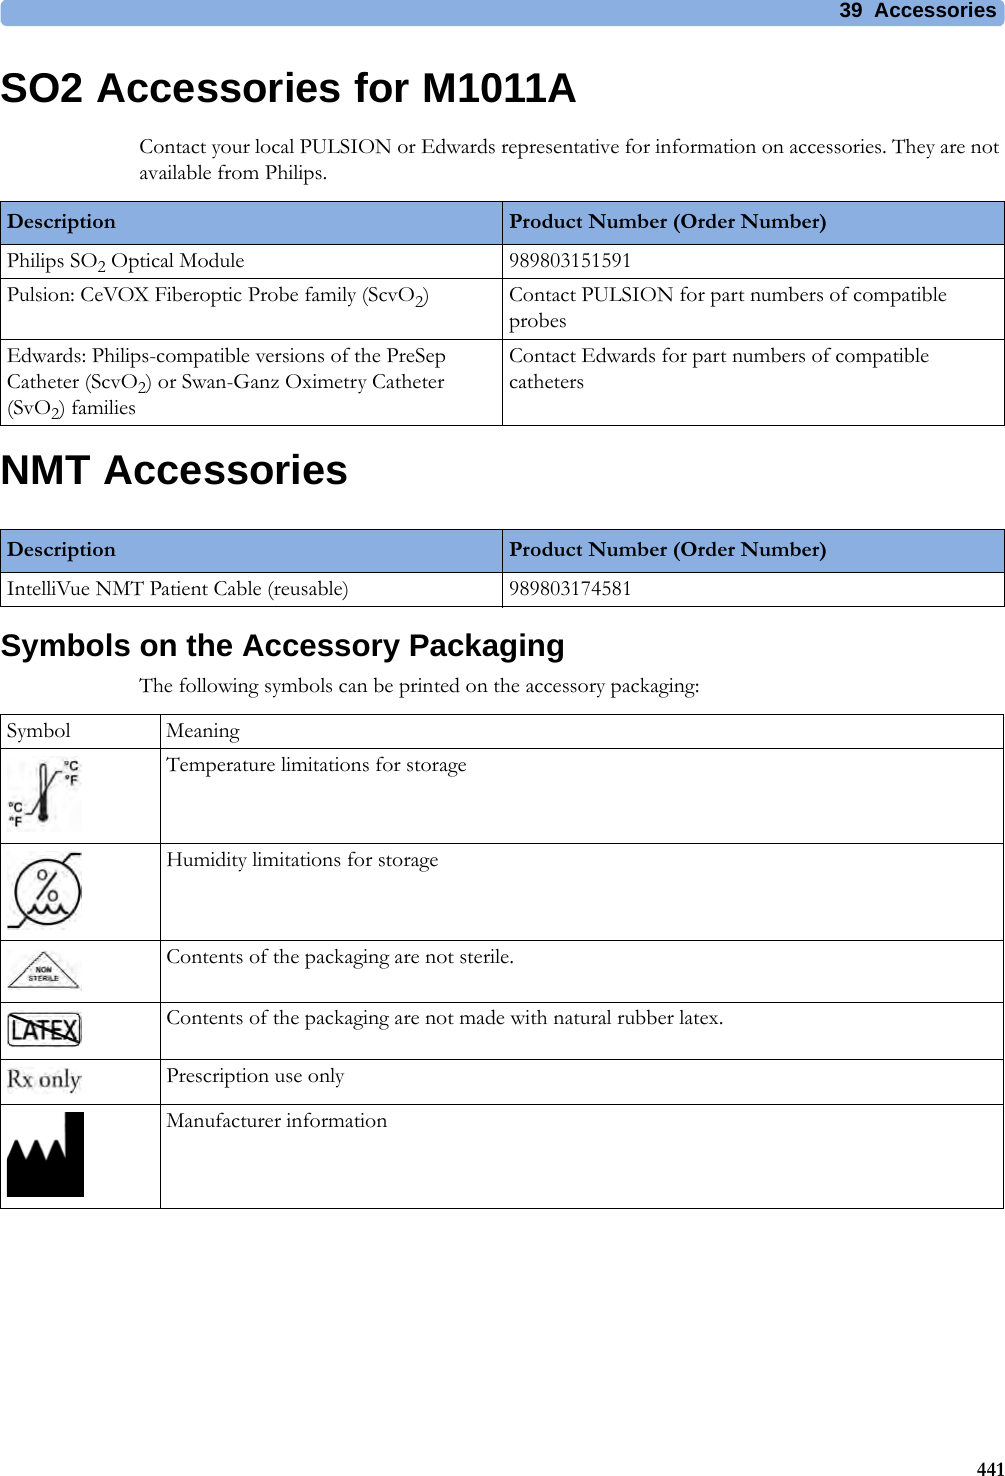 39 Accessories441SO2 Accessories for M1011AContact your local PULSION or Edwards representative for information on accessories. They are not available from Philips.NMT AccessoriesSymbols on the Accessory PackagingThe following symbols can be printed on the accessory packaging:Description Product Number (Order Number)Philips SO2 Optical Module 989803151591Pulsion: CeVOX Fiberoptic Probe family (ScvO2) Contact PULSION for part numbers of compatible probesEdwards: Philips-compatible versions of the PreSep Catheter (ScvO2) or Swan-Ganz Oximetry Catheter (SvO2) familiesContact Edwards for part numbers of compatible cathetersDescription Product Number (Order Number)IntelliVue NMT Patient Cable (reusable) 989803174581Symbol MeaningTemperature limitations for storageHumidity limitations for storageContents of the packaging are not sterile.Contents of the packaging are not made with natural rubber latex.Prescription use onlyManufacturer information